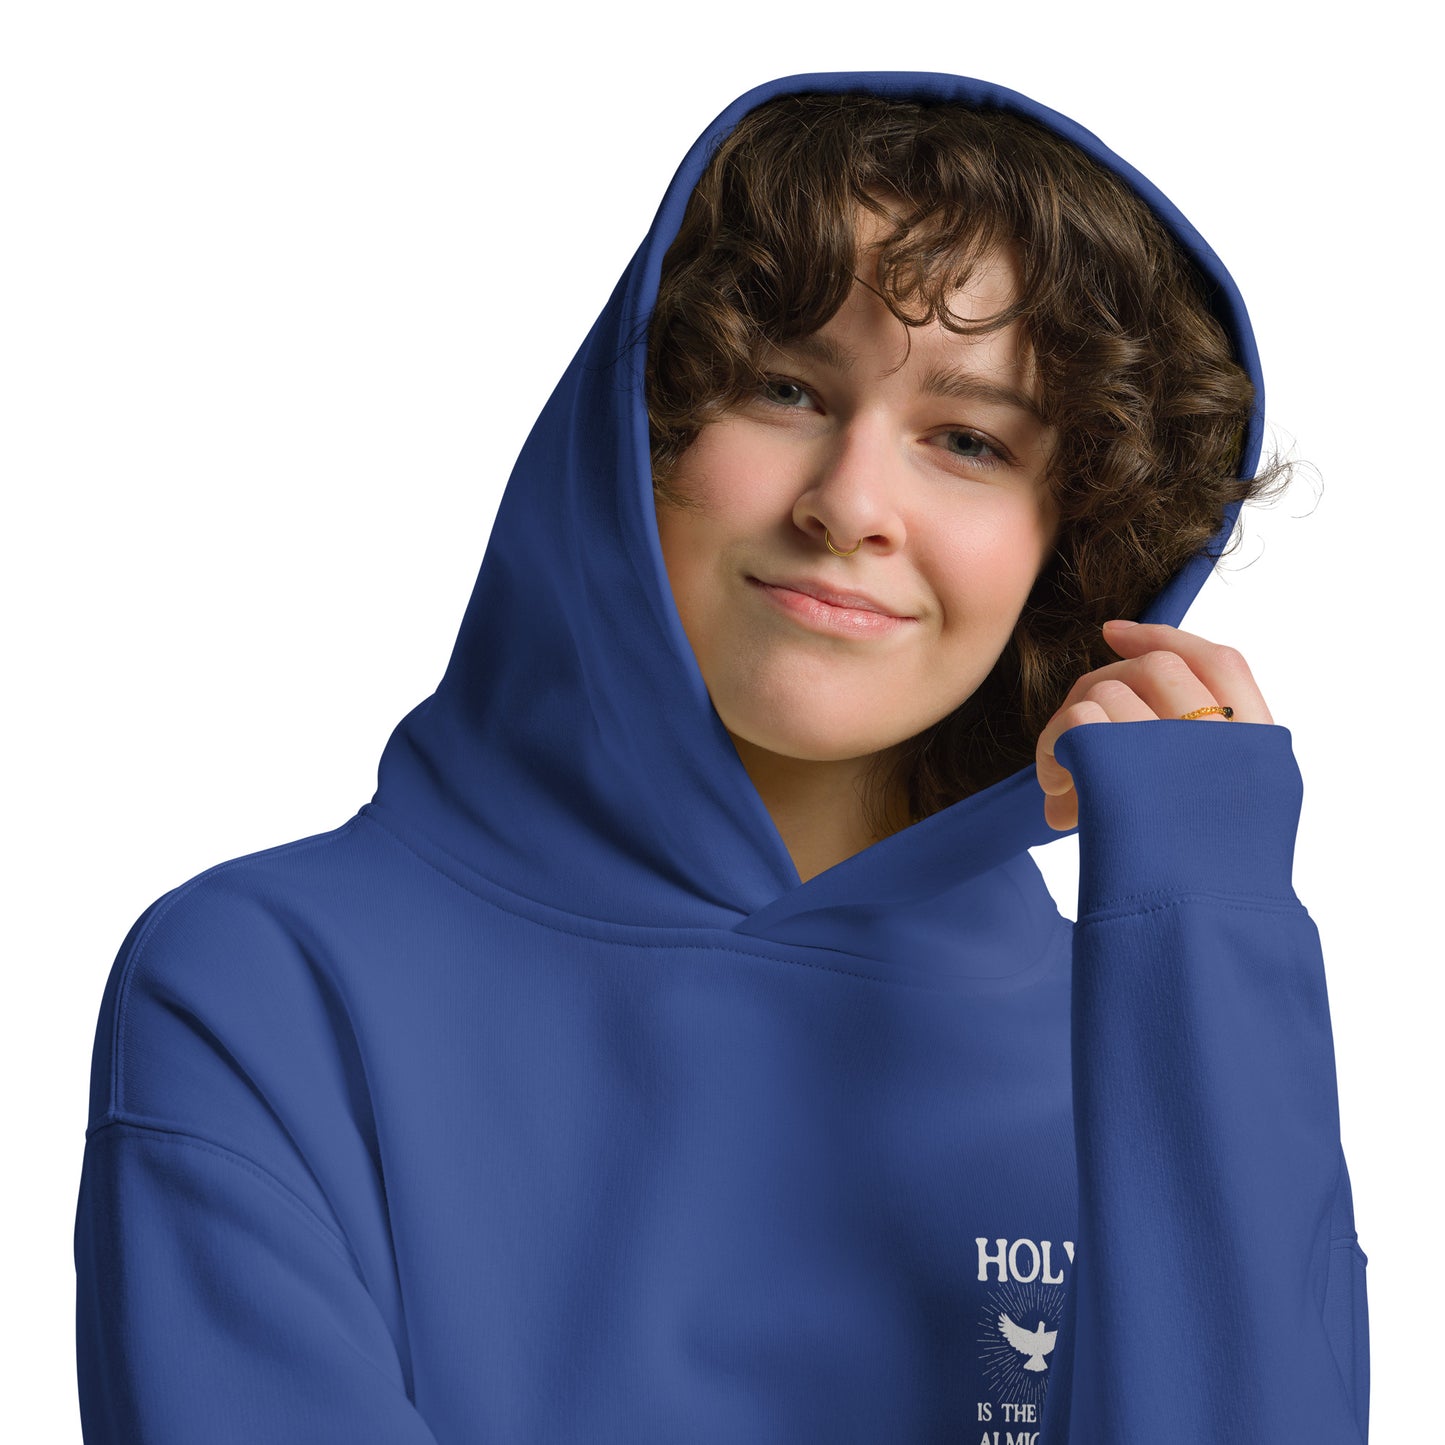 "Holy is the Lord" Cobalt Blue Hoodie